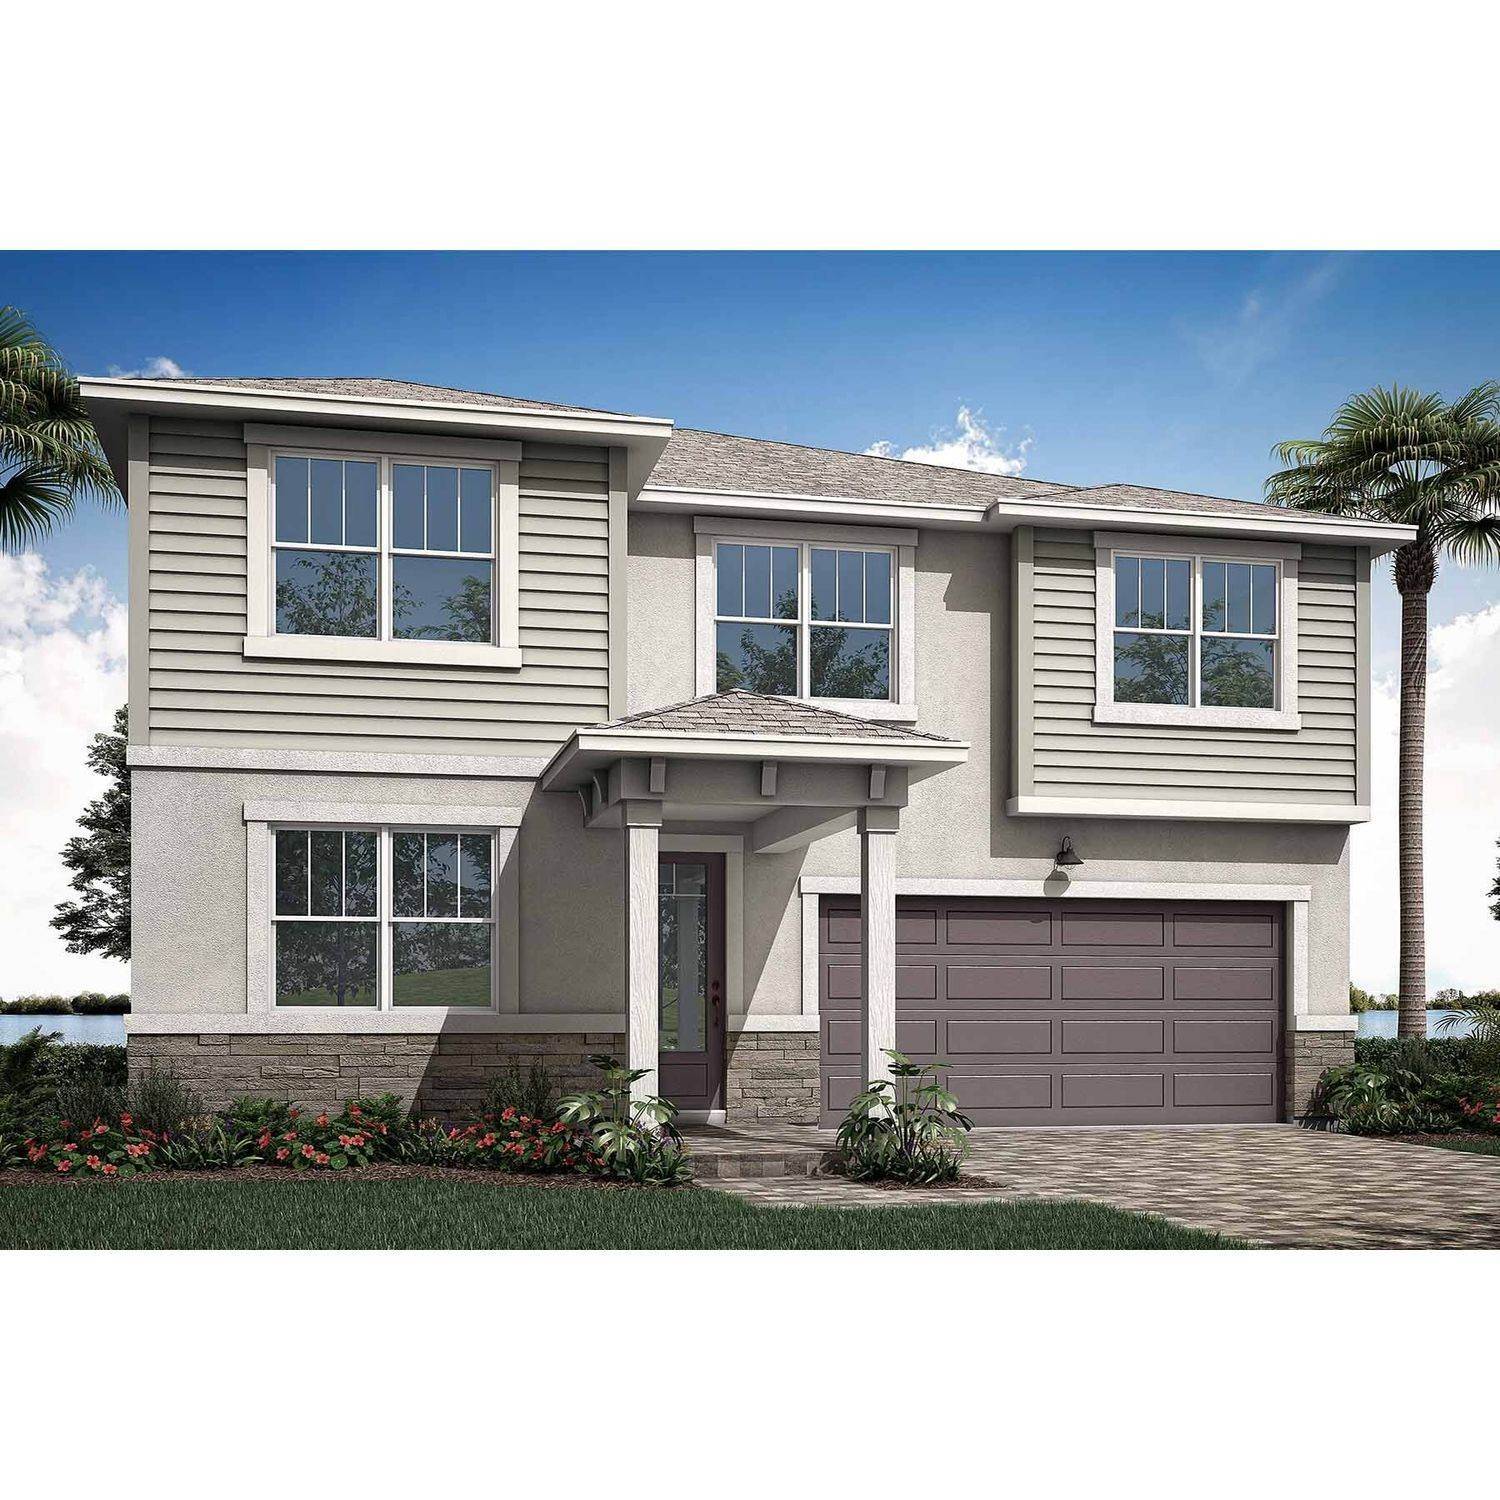 Single Family for Sale at Port St. Lucie, FL 34987